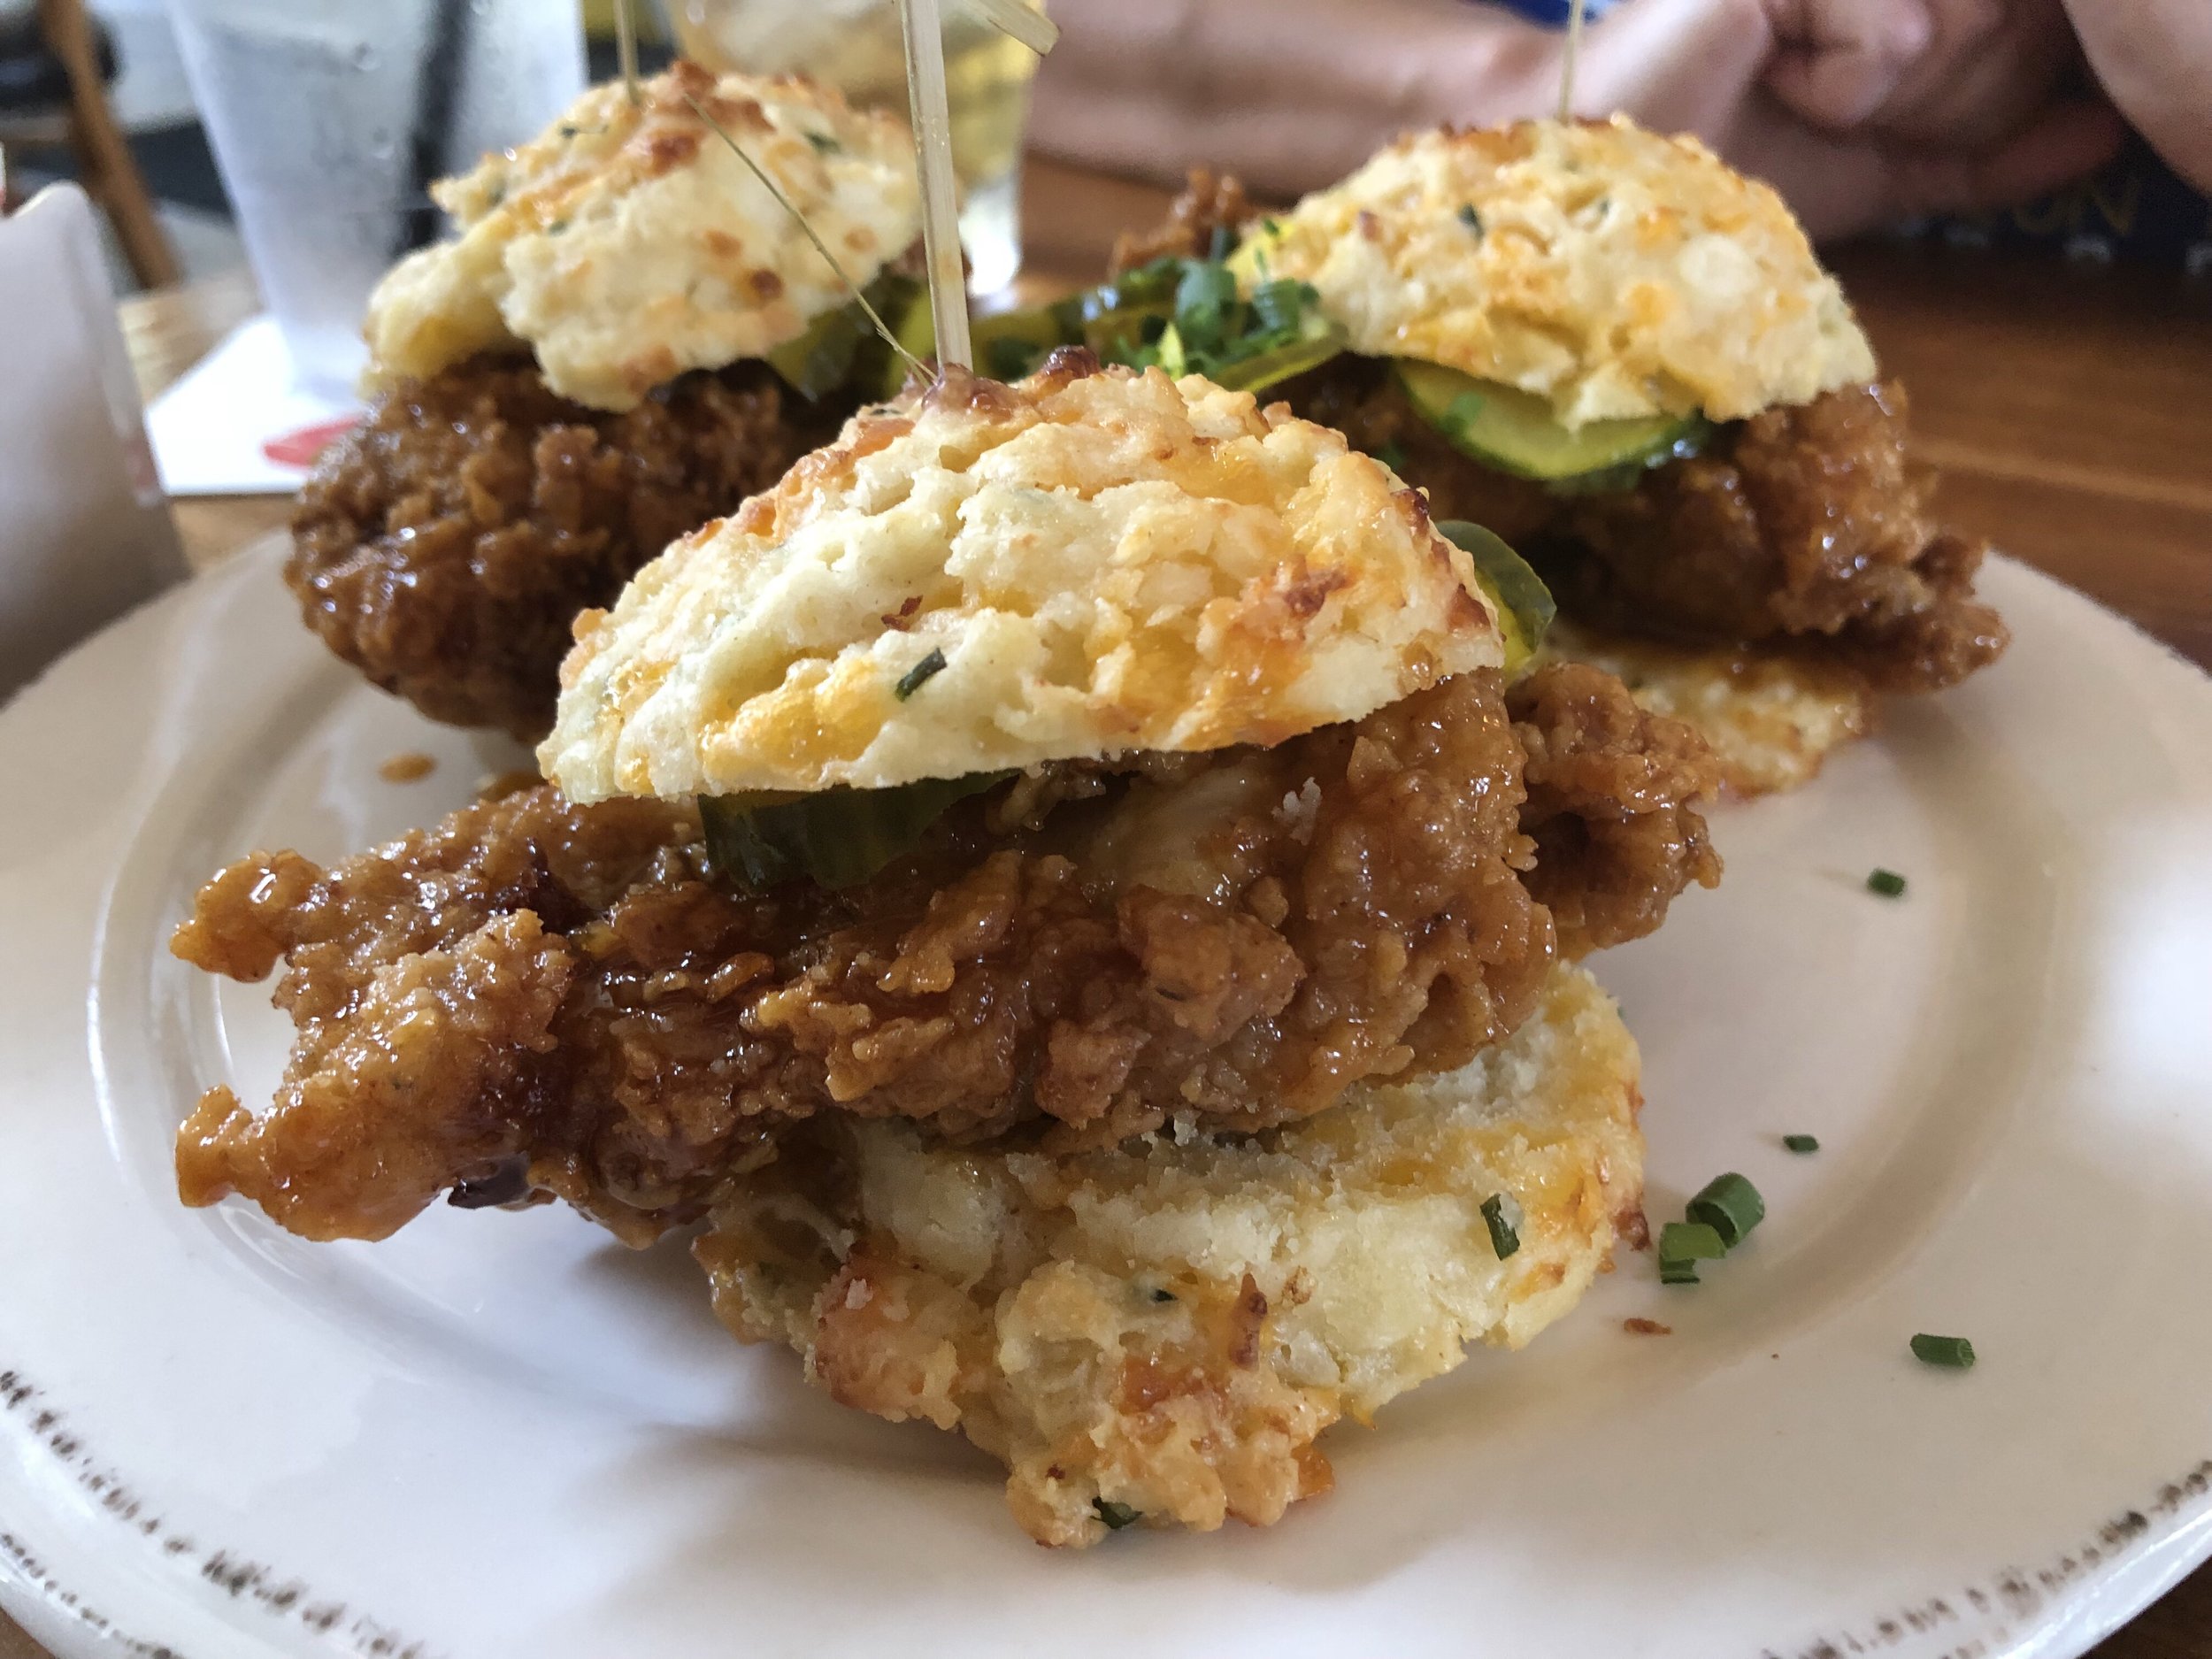 Thigh High Chicken Biscuits at Chef Art Smith's Homecomin'